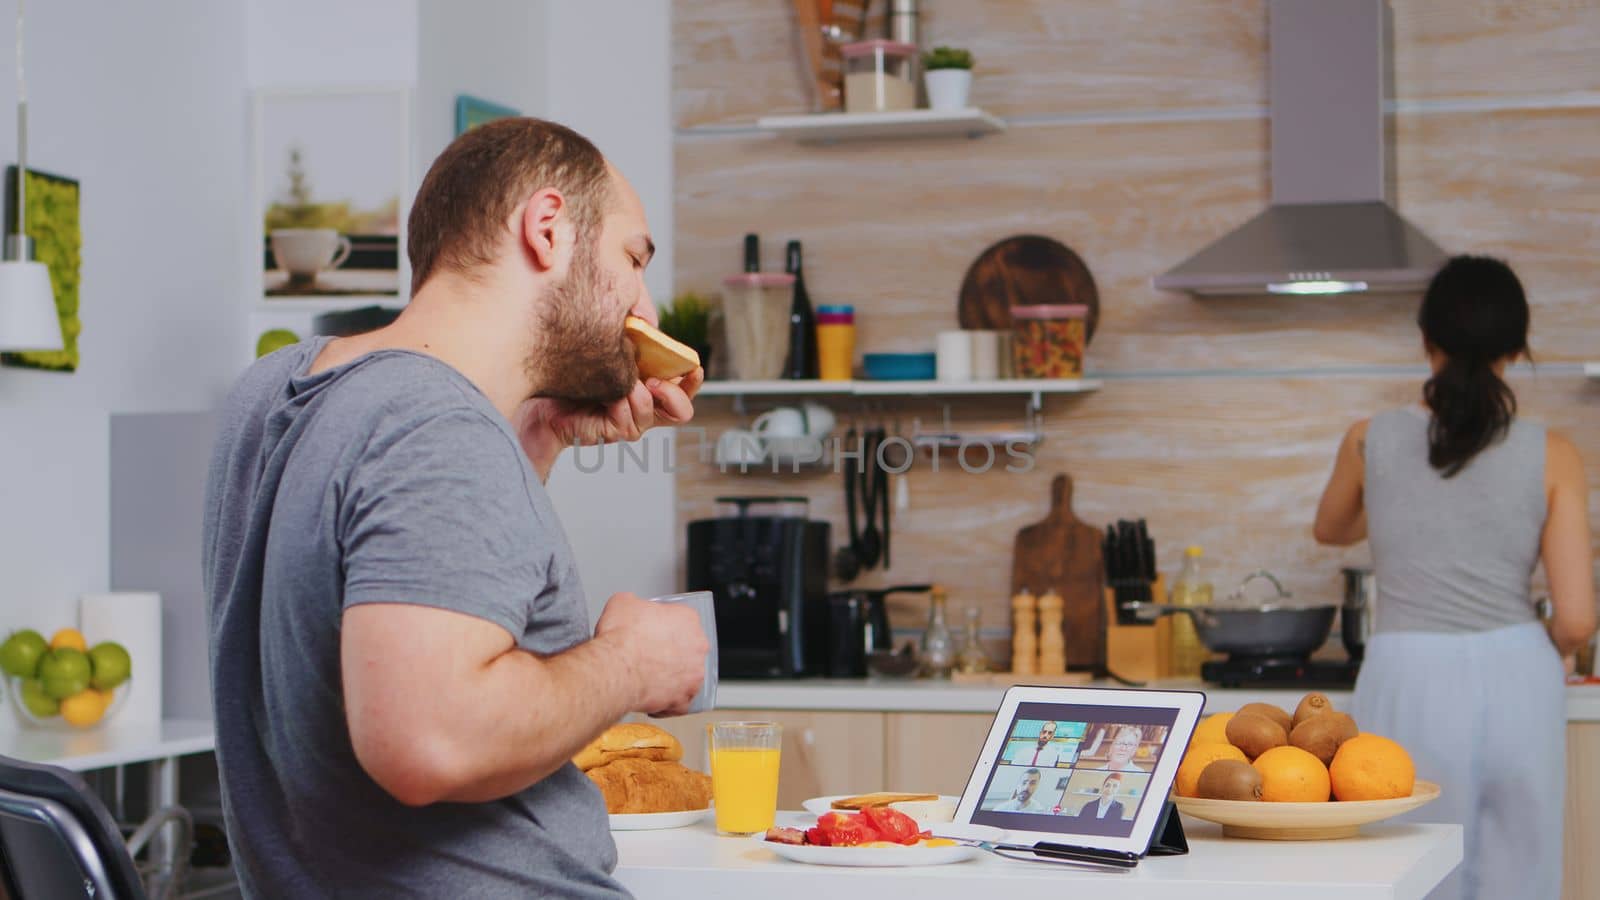 Entrepreneur on a video conference while eating breakfast in kitchen. Freelancer working remote, talking in videoconference video call online web internet meeting from home, communication device